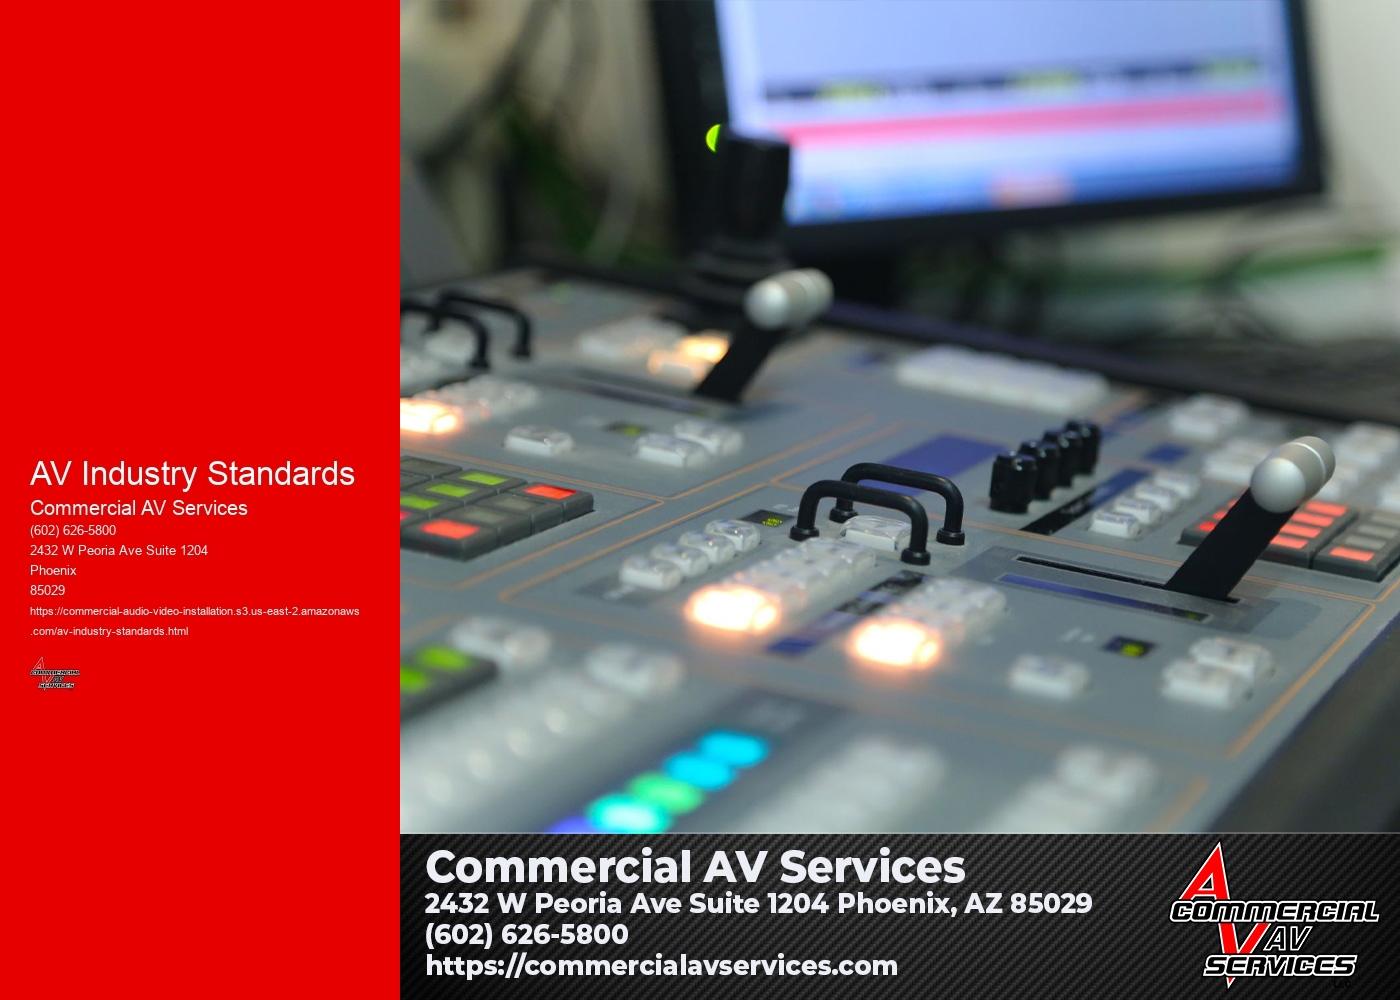 What are the recommended audio standards for AV installations to ensure high-quality sound reproduction?